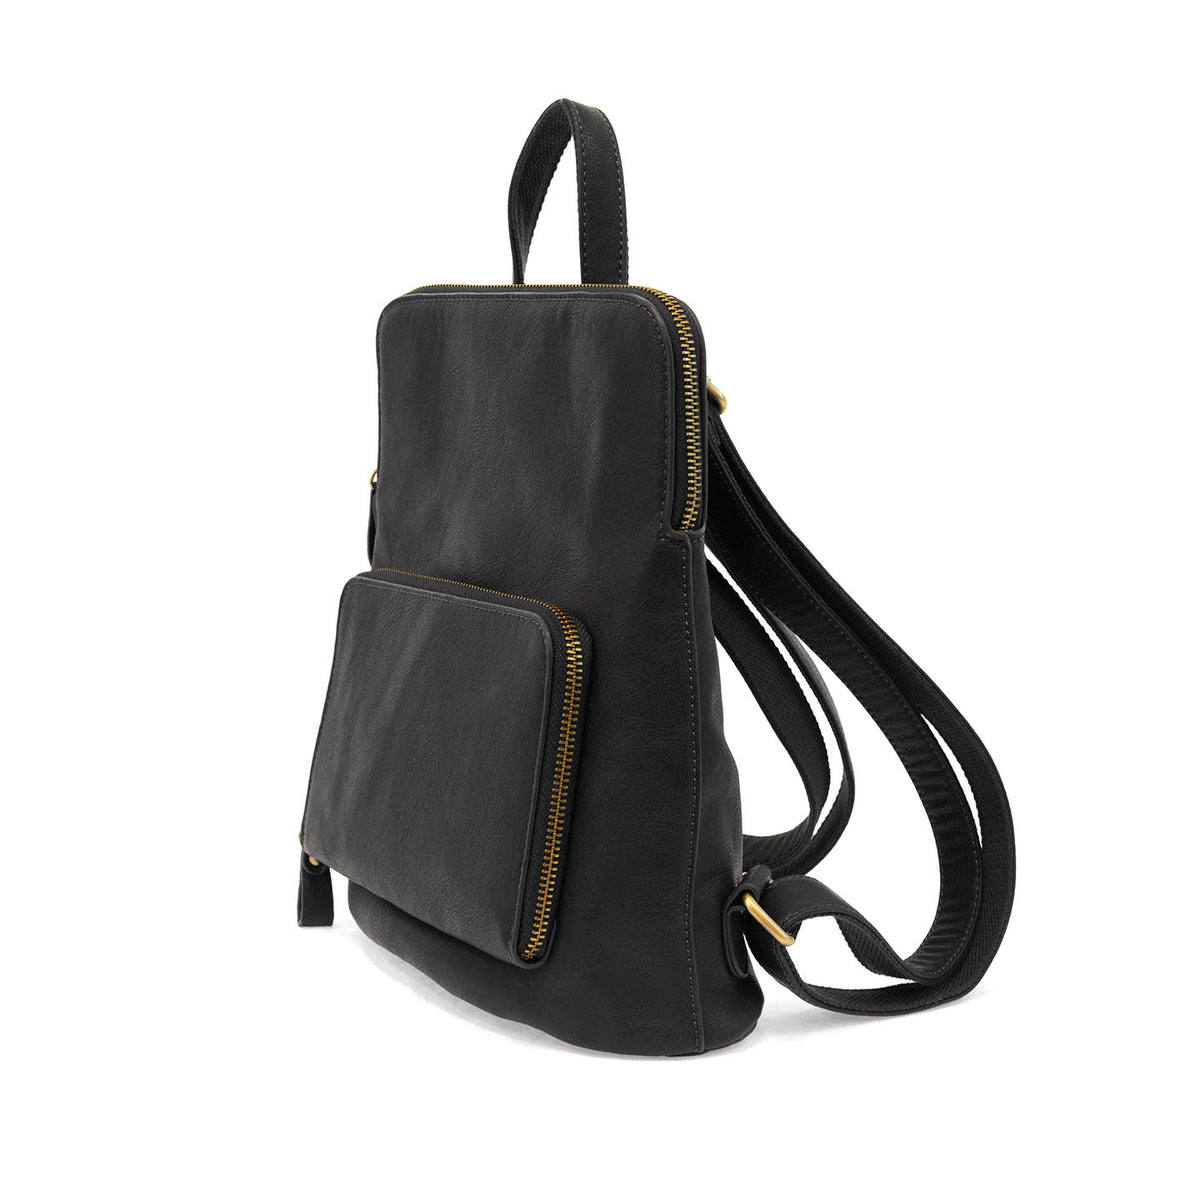 Joy Susan Julia Mini Backpack Black with gold-tone zippers, isolated on a white background.